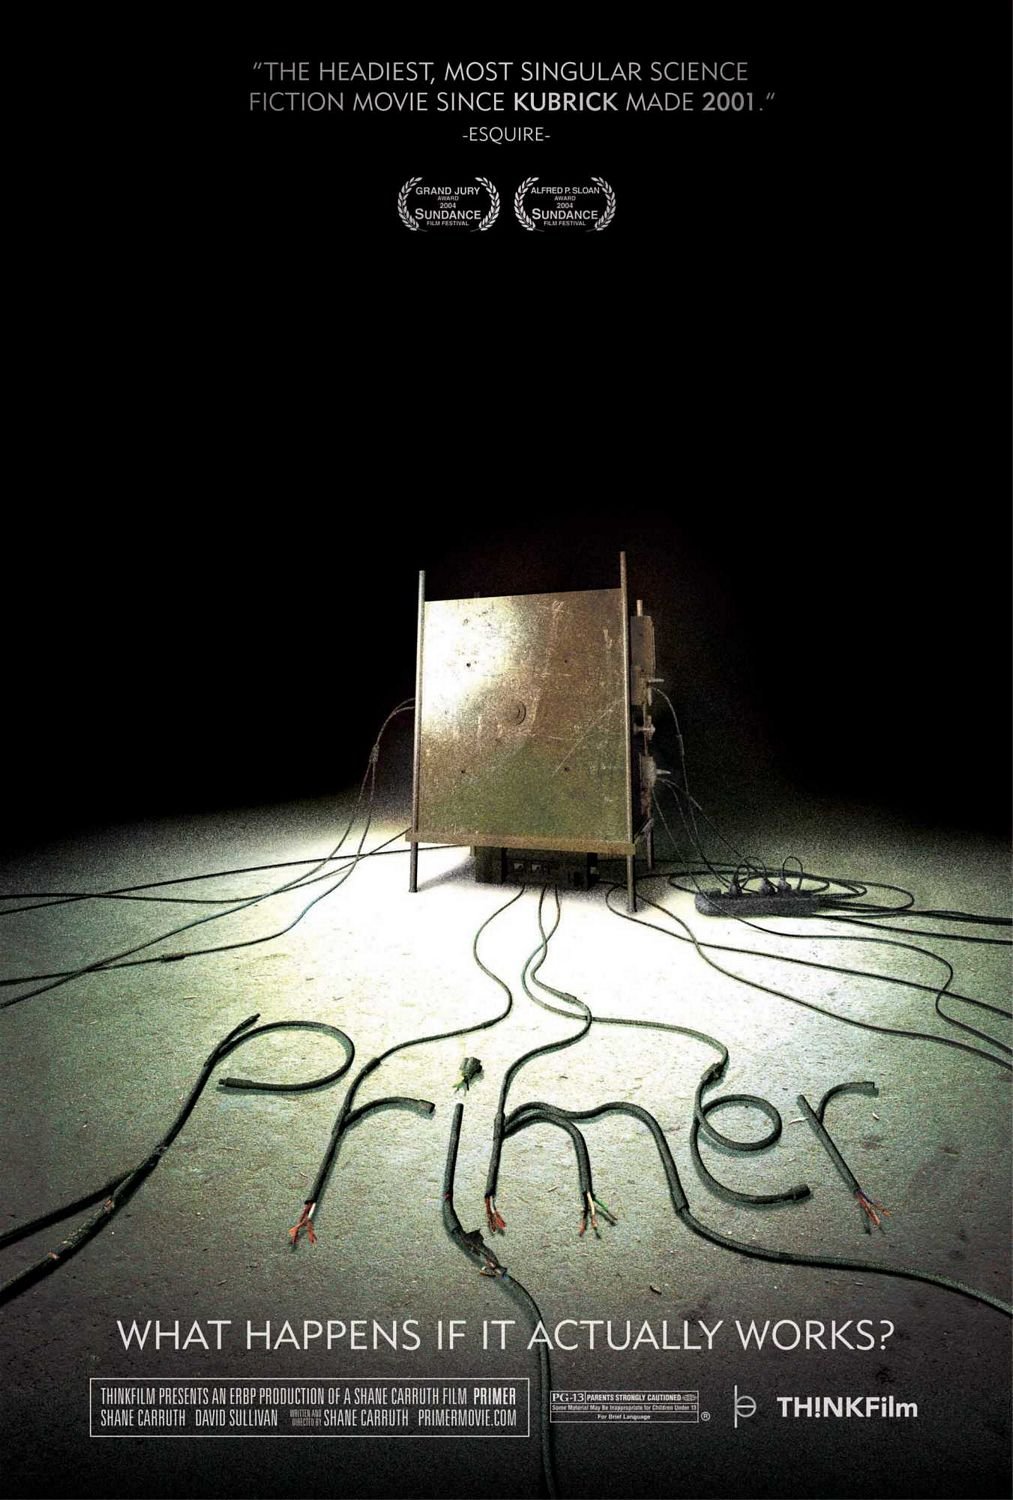 Poster of the movie Primer